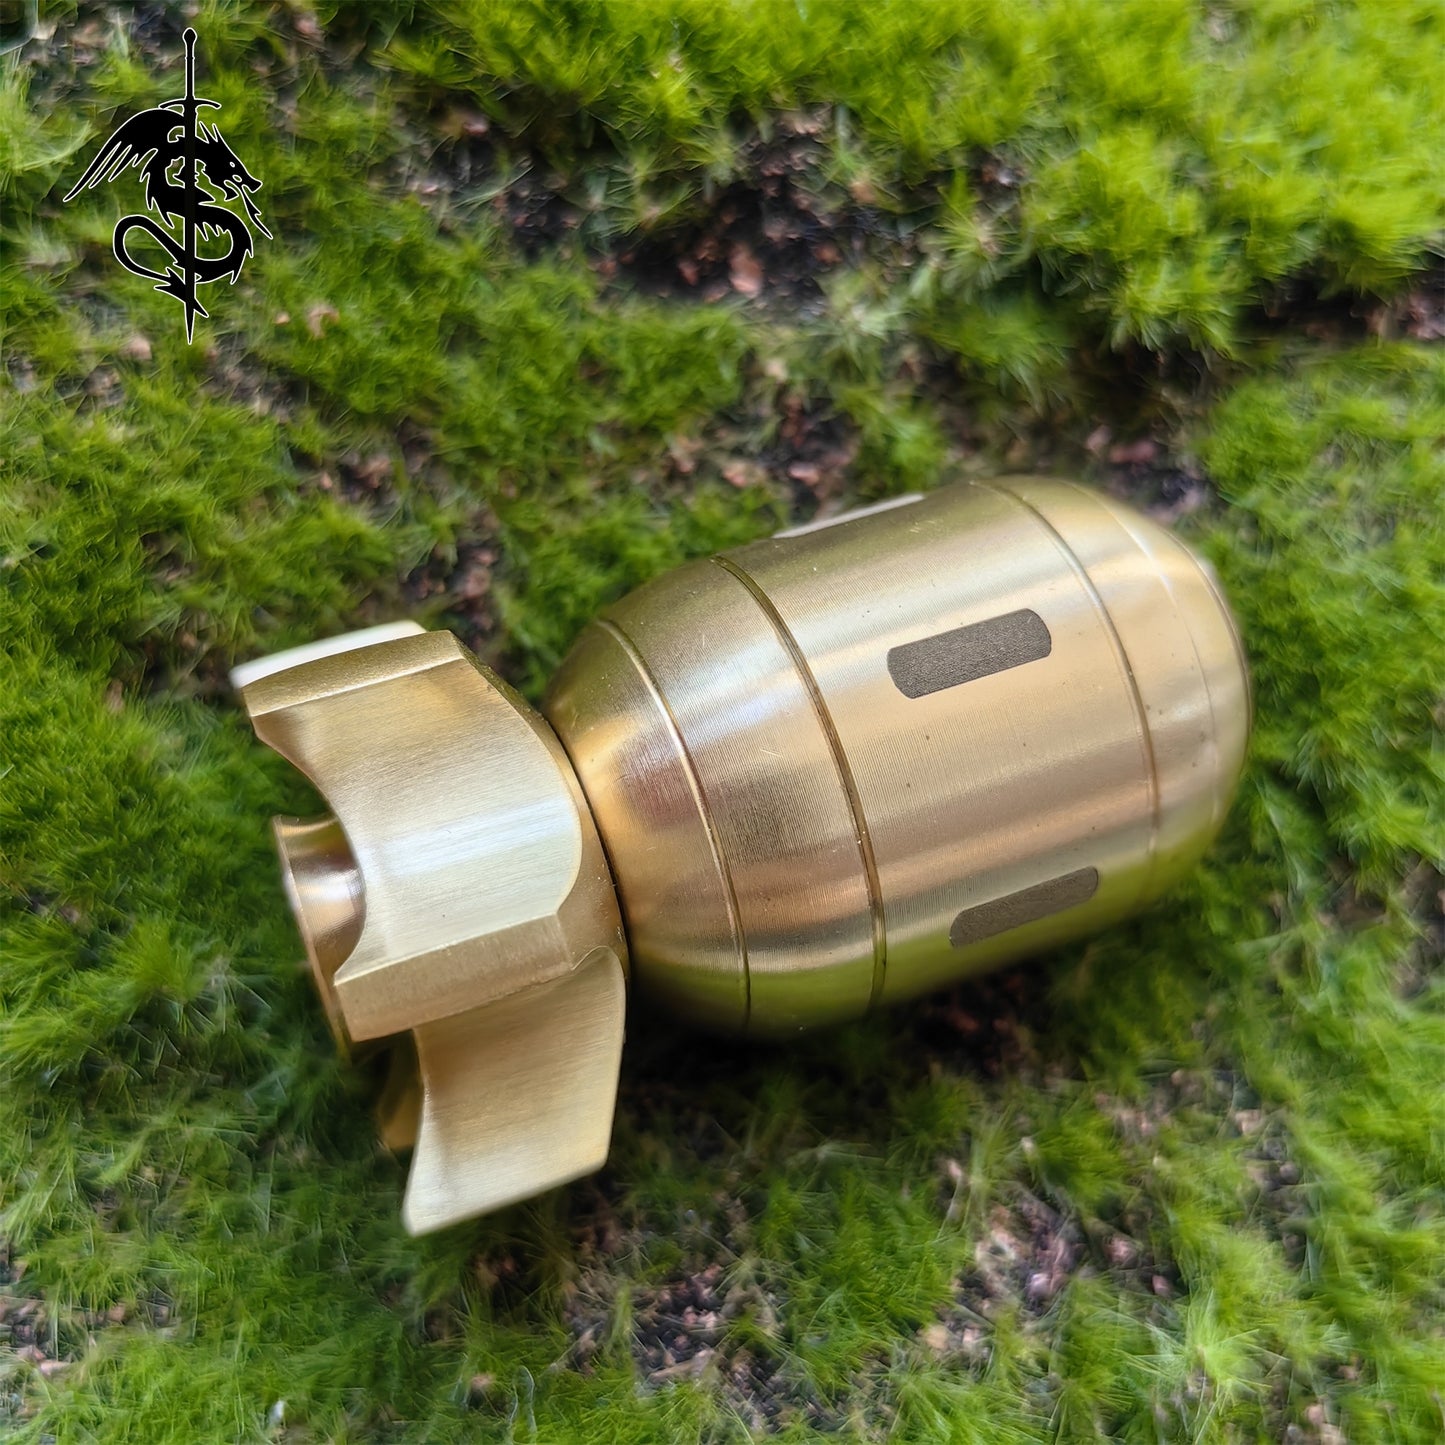 Brass Bomb Nuclear Bomb Replica Military Hobby Gift